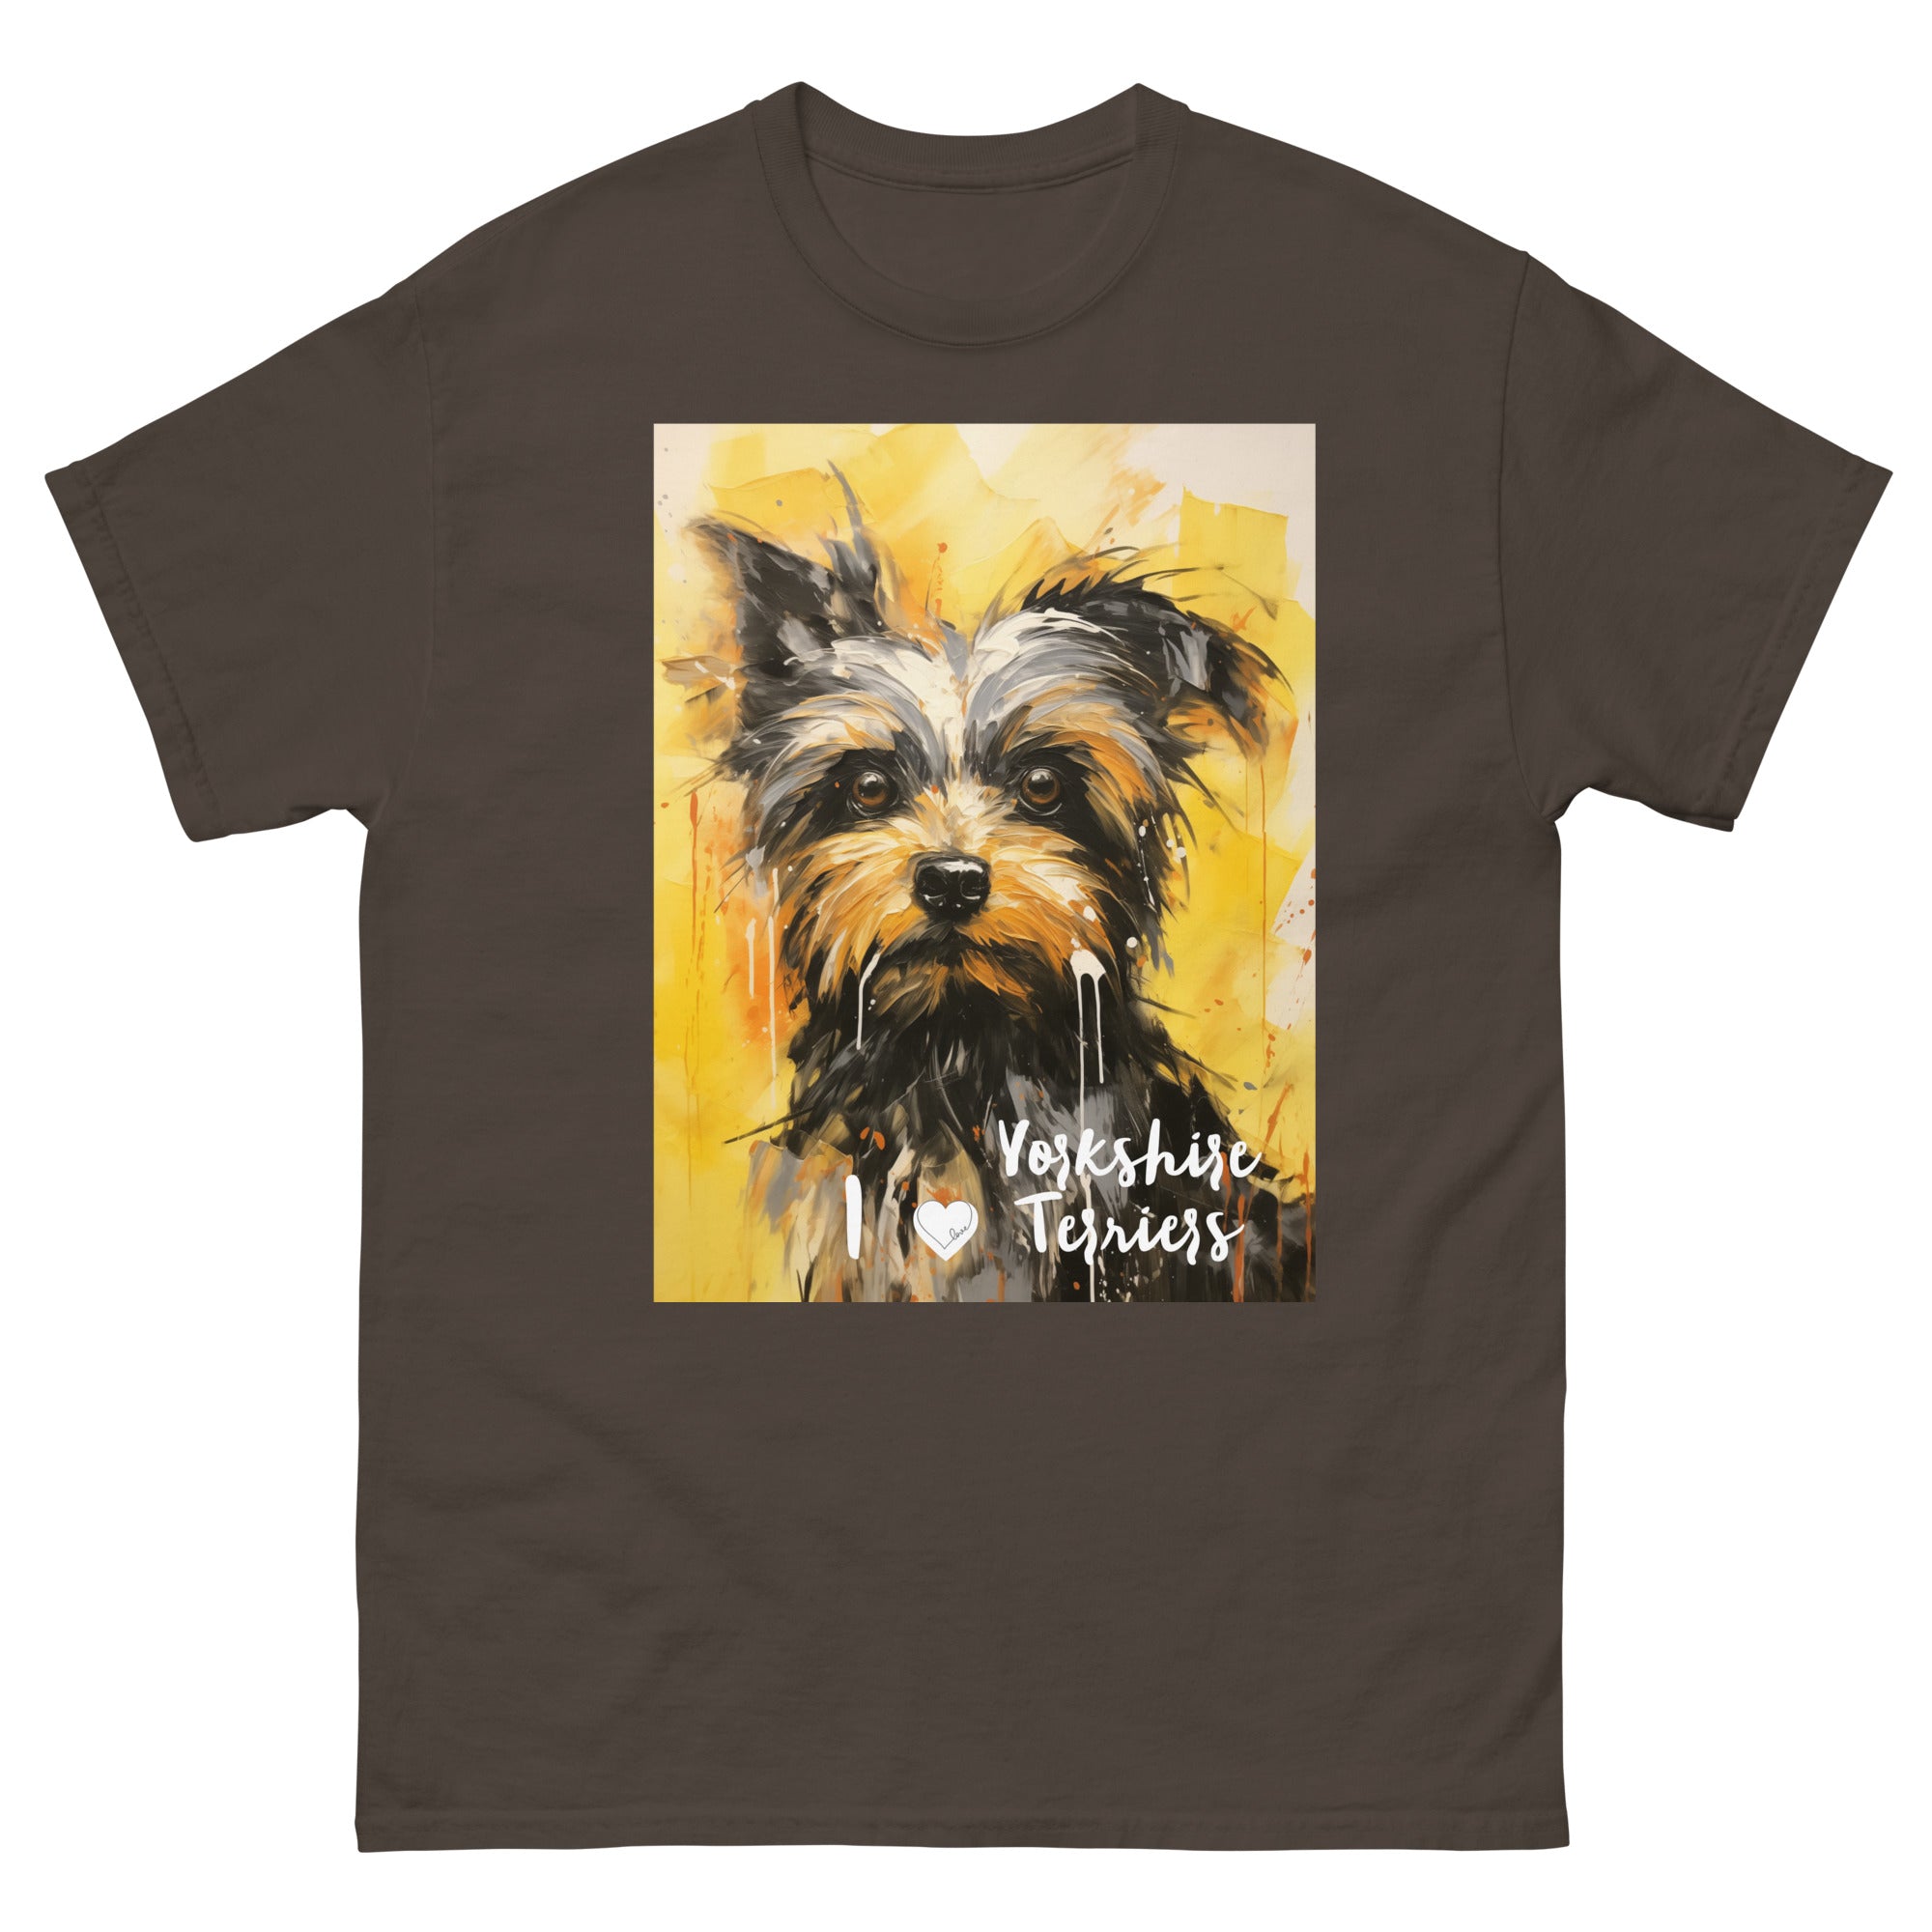 Men's classic tee - I ❤ DOGS - Yorkshire Terrier